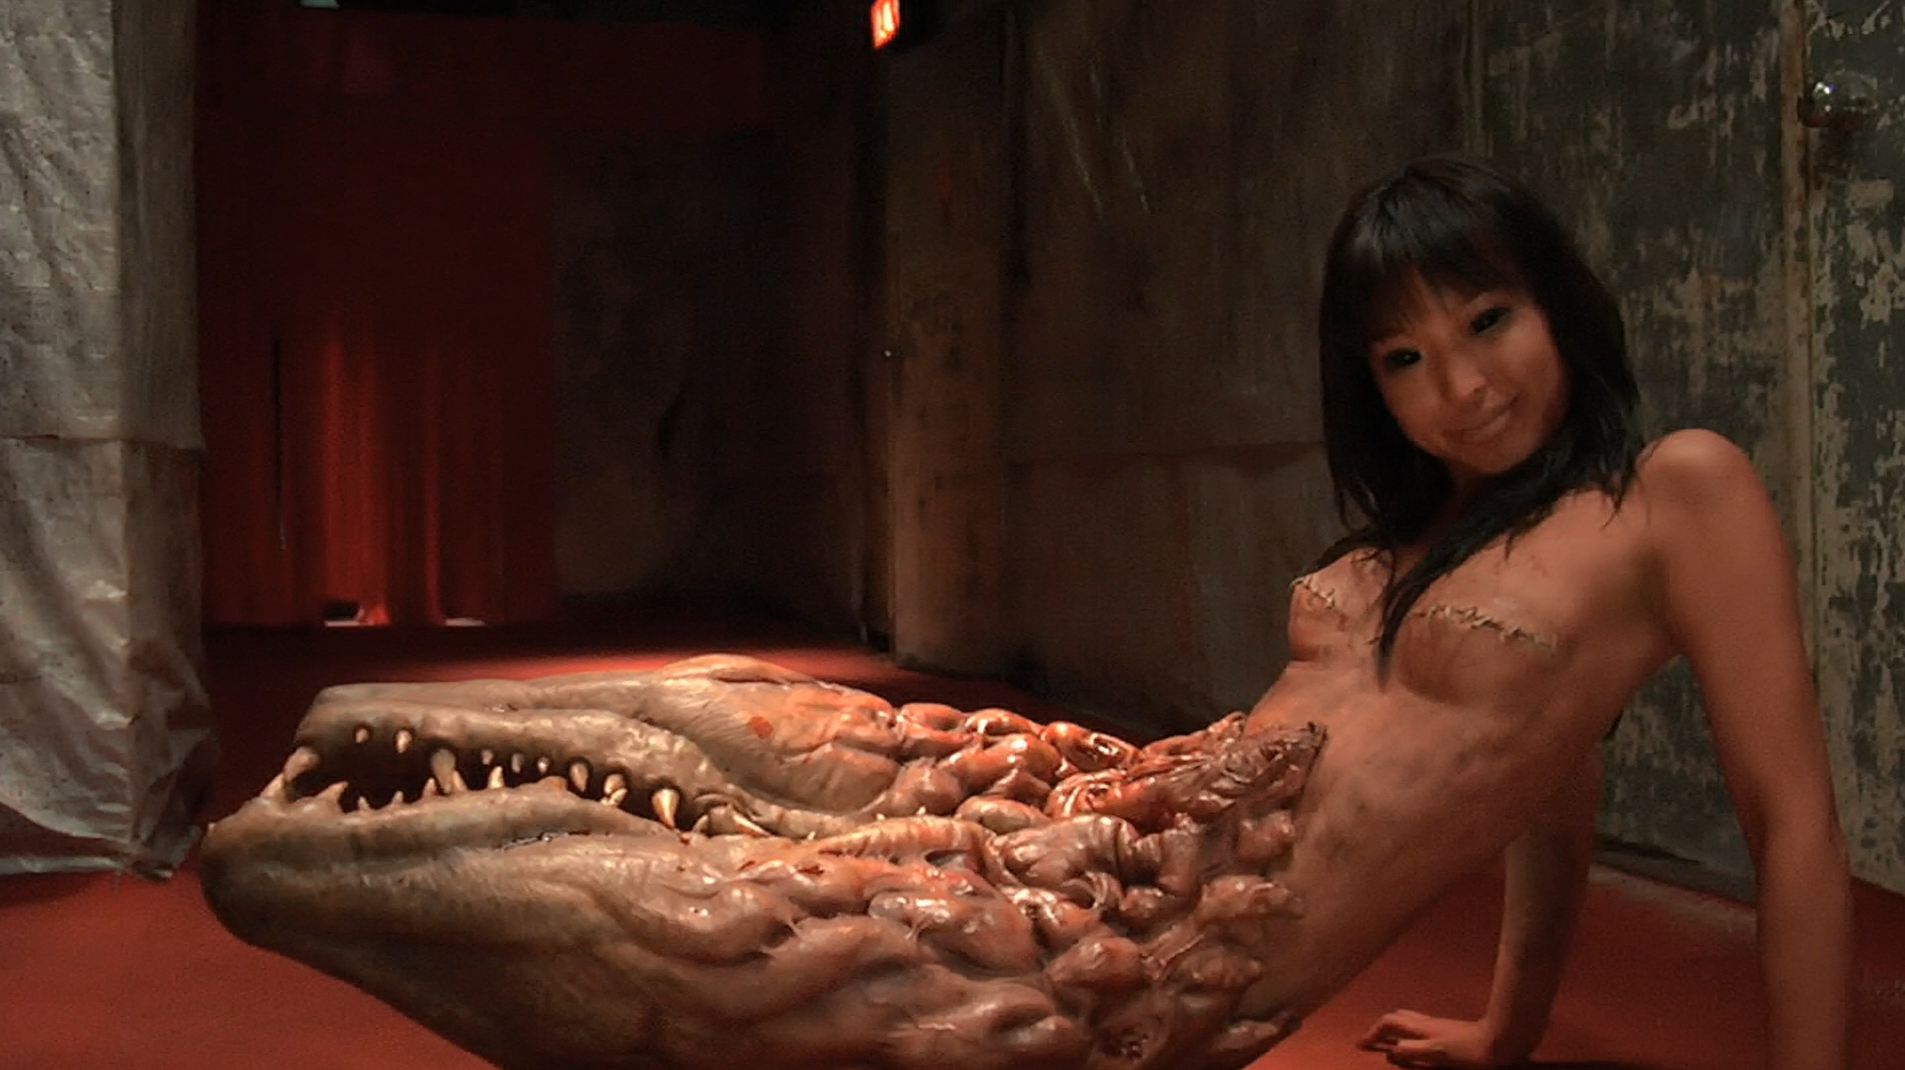 Sexy Blue Film Bf Video Sexy Horror Film - 23+ Most Extreme Horror Movies from Japan â€“ The Crypt